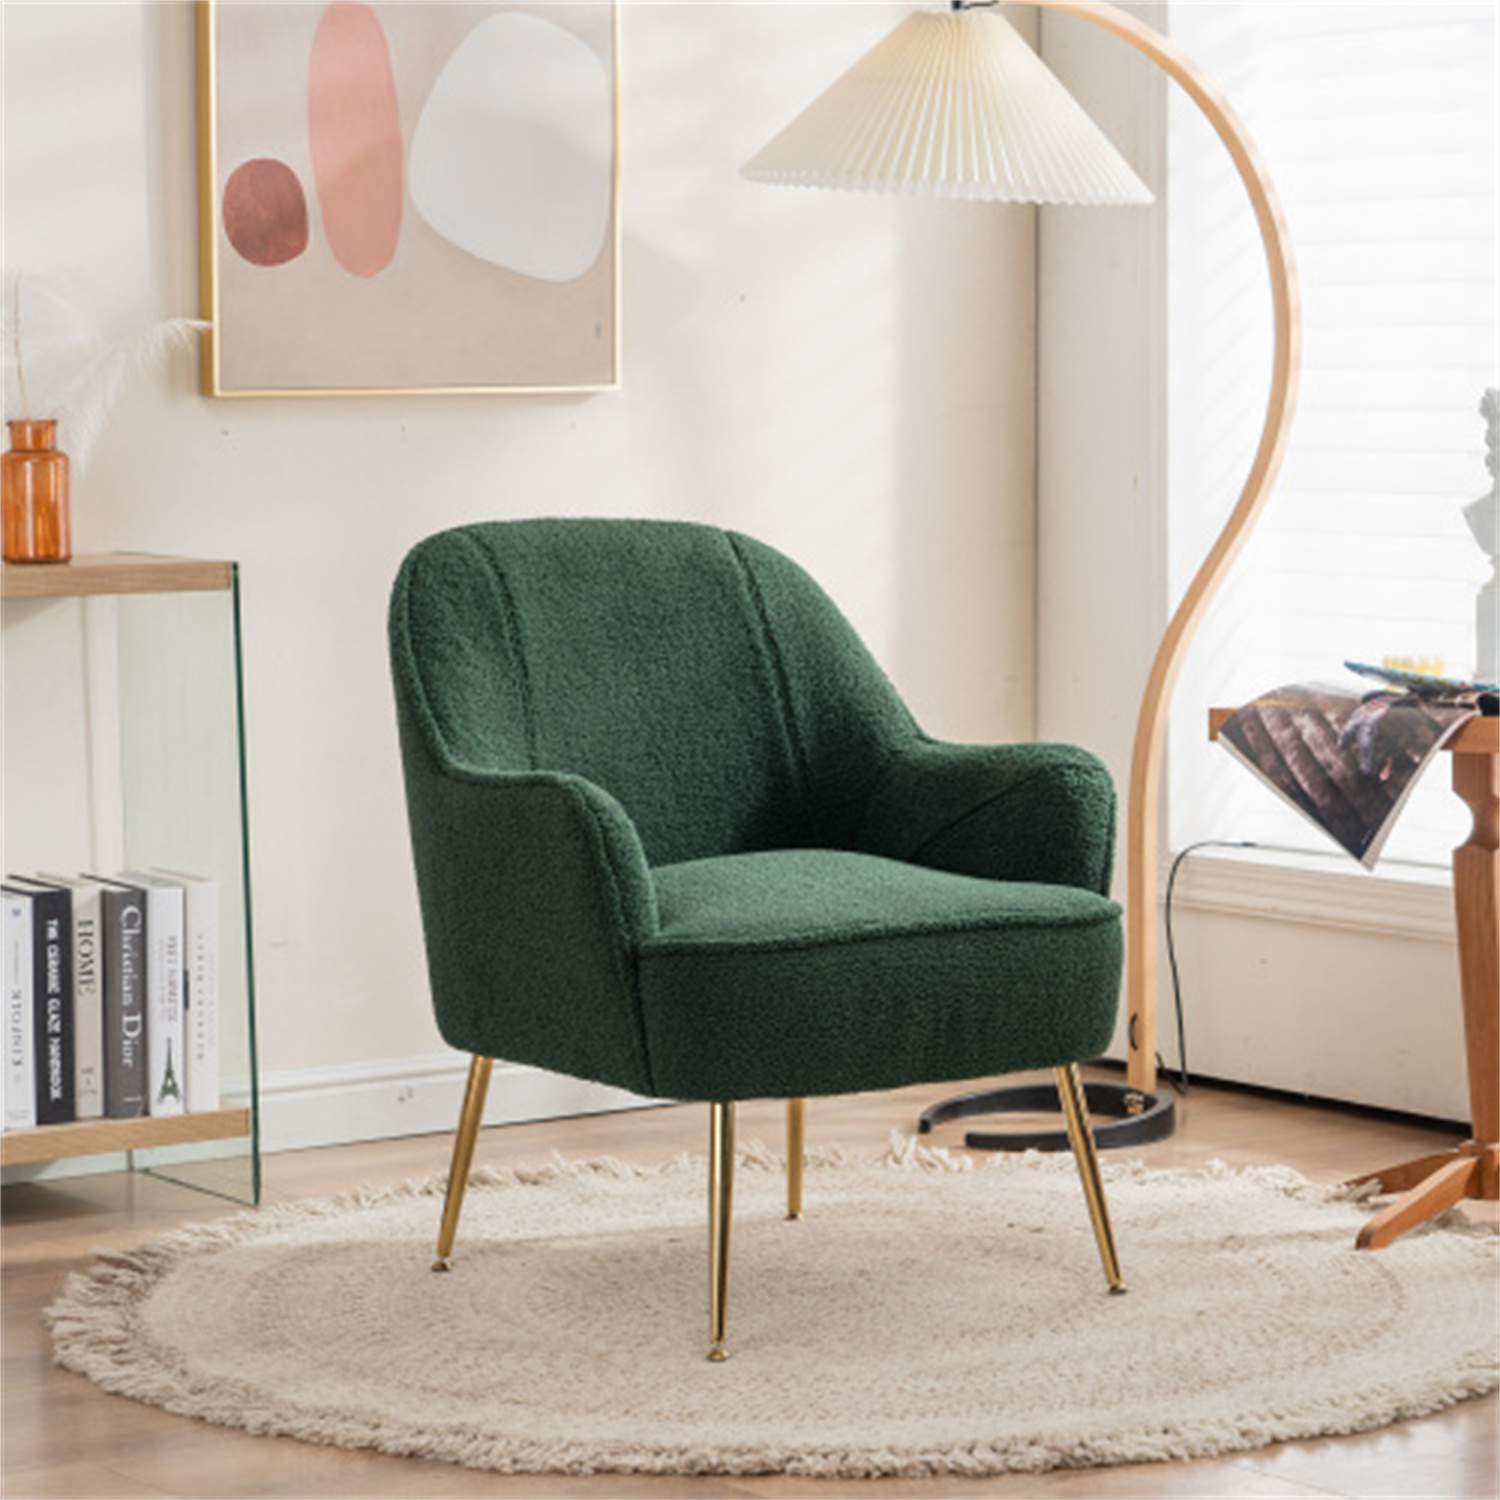 Modern Soft Green Teddy Fabric White Ergonomics Accent Chair Living Room Chair Bedroom Chair Home Chair With Gold Legs And Adjustable Legs For Indoor Home